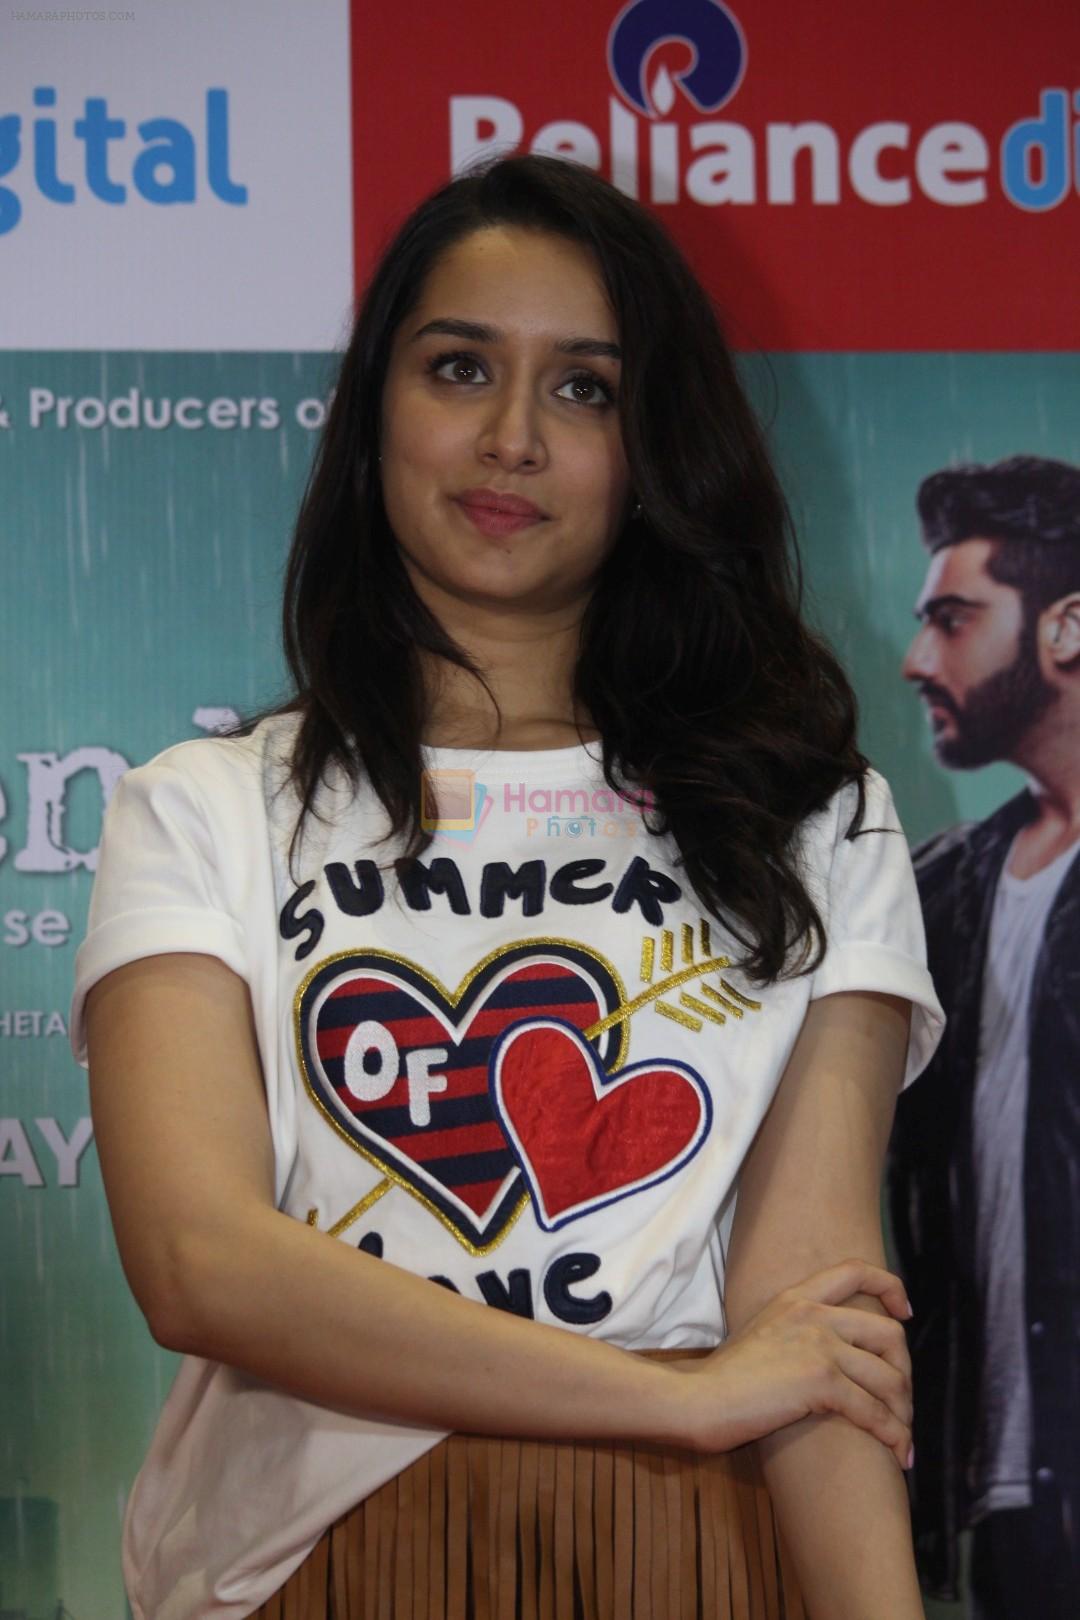 Shraddha Kapoor Promotes Half Girlfriend at Reliance Digital Store on 20th May 2017